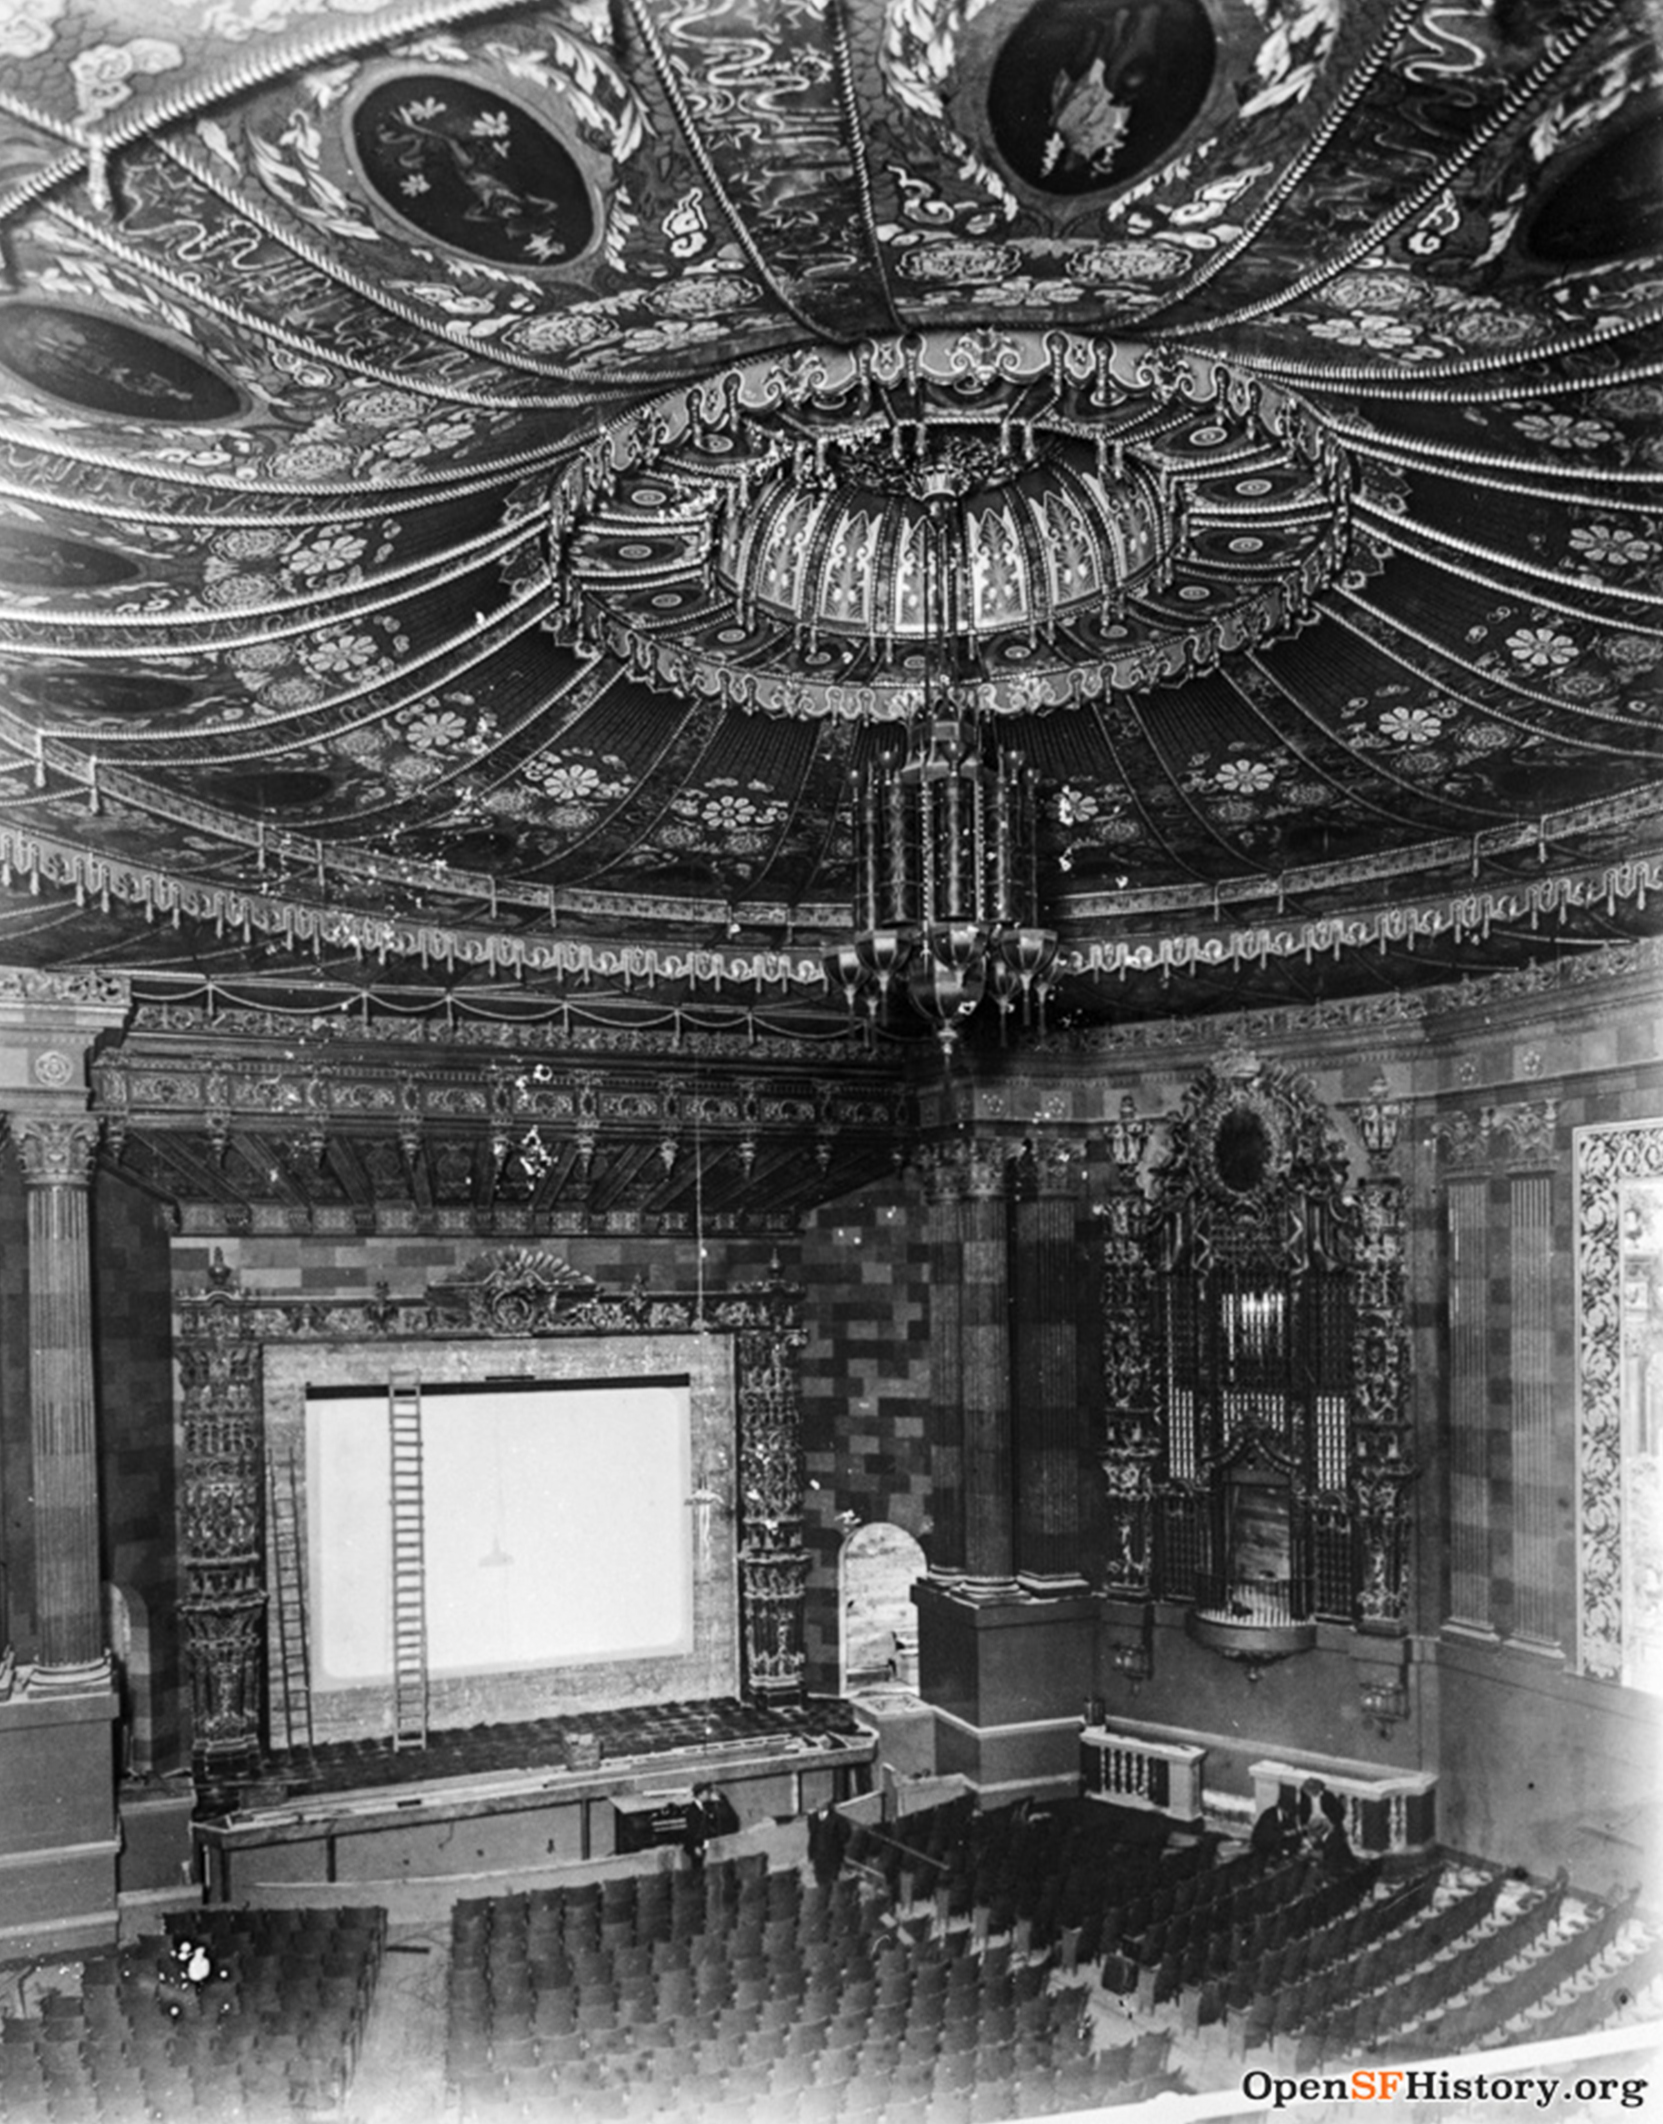 a black-and-white archival shot of a movie theater interior